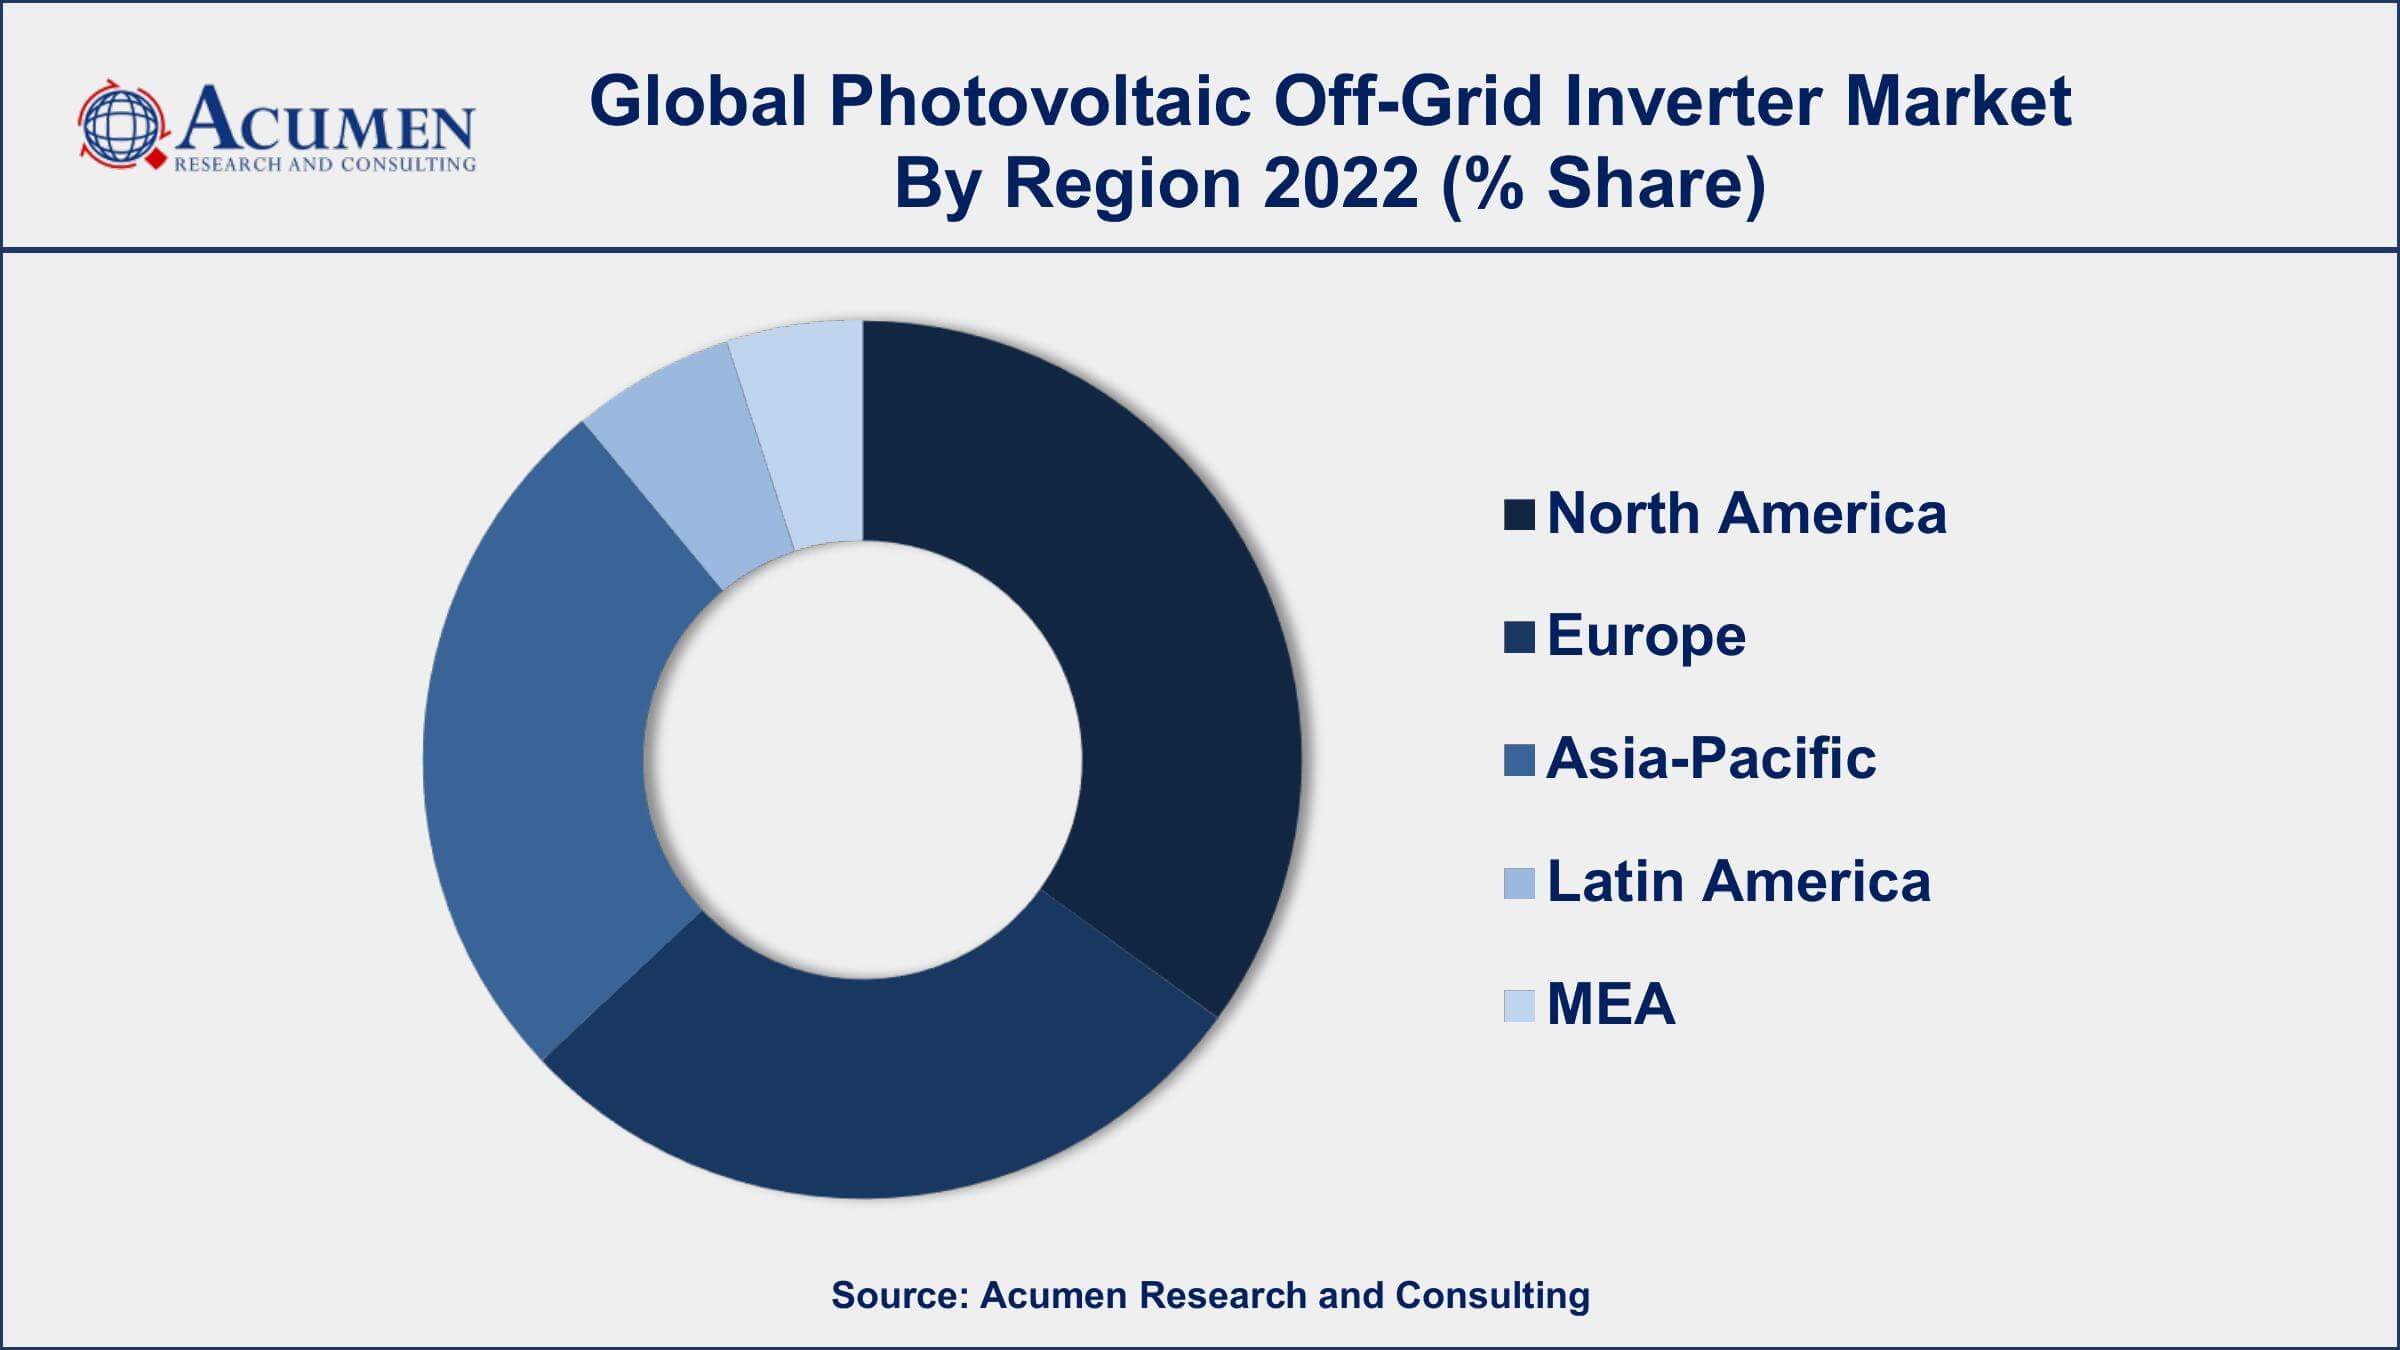 Photovoltaic Off-Grid Inverter Market Drivers